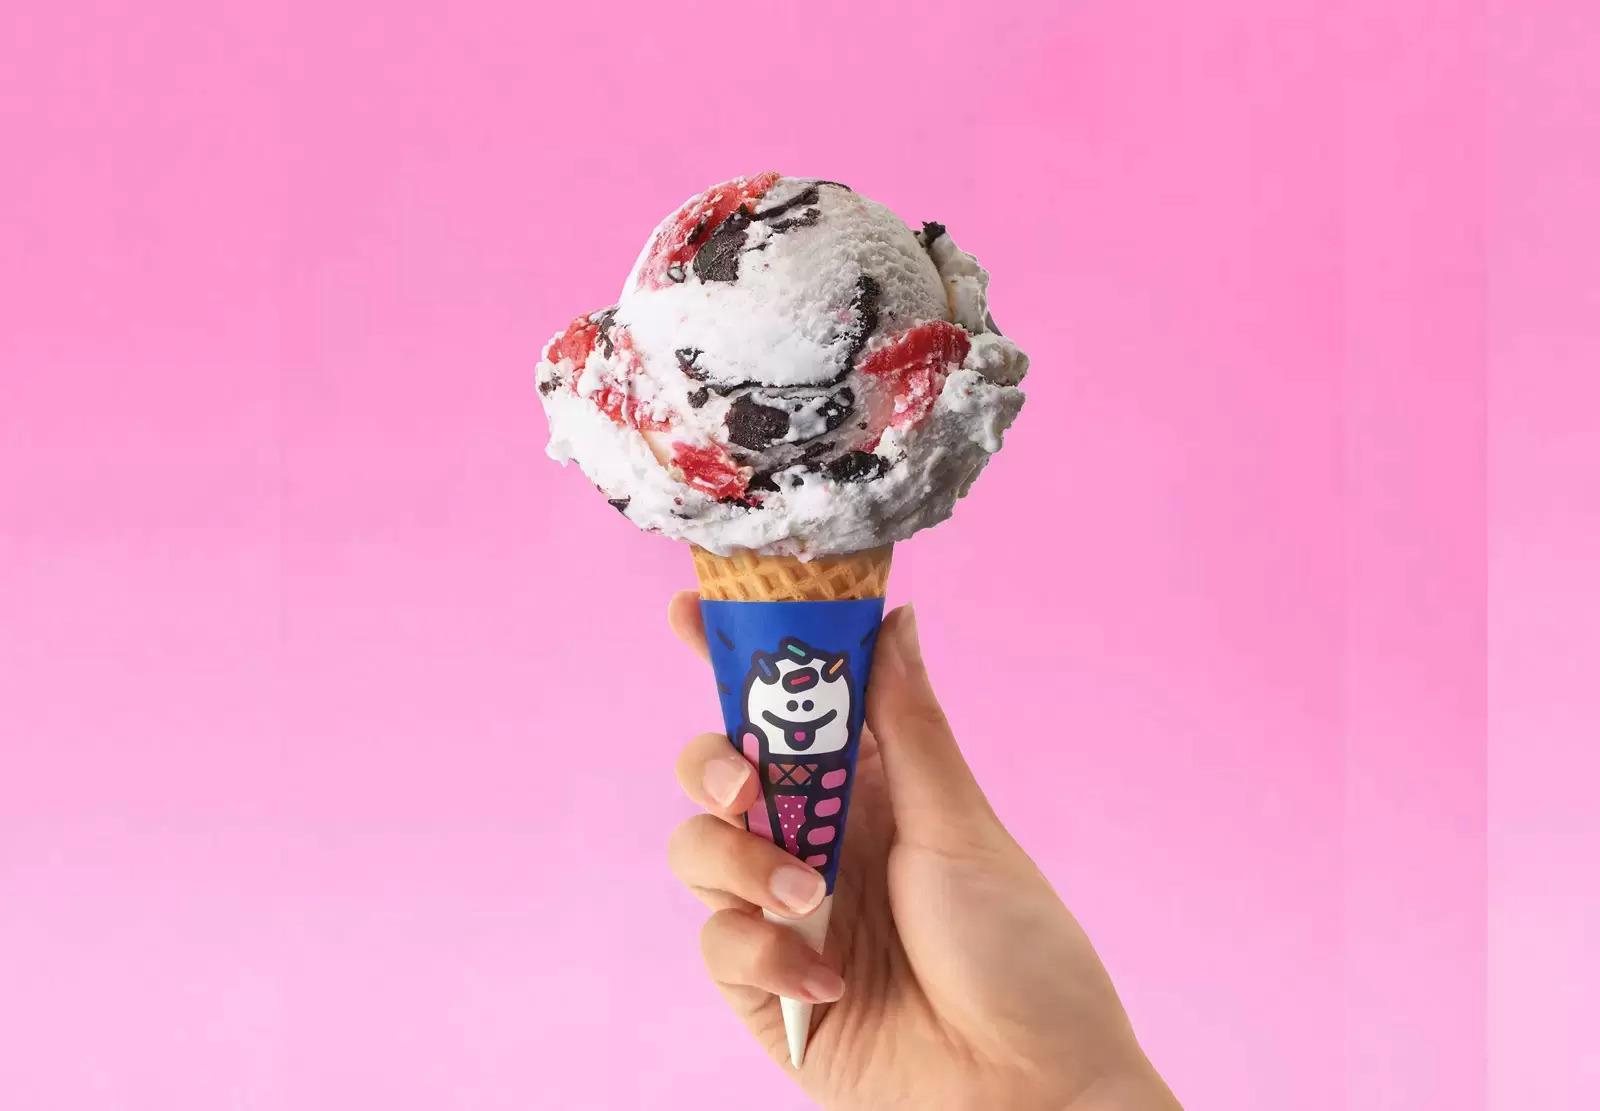 How to Get a Baskin Robbins Ice Cream Scoop for Free